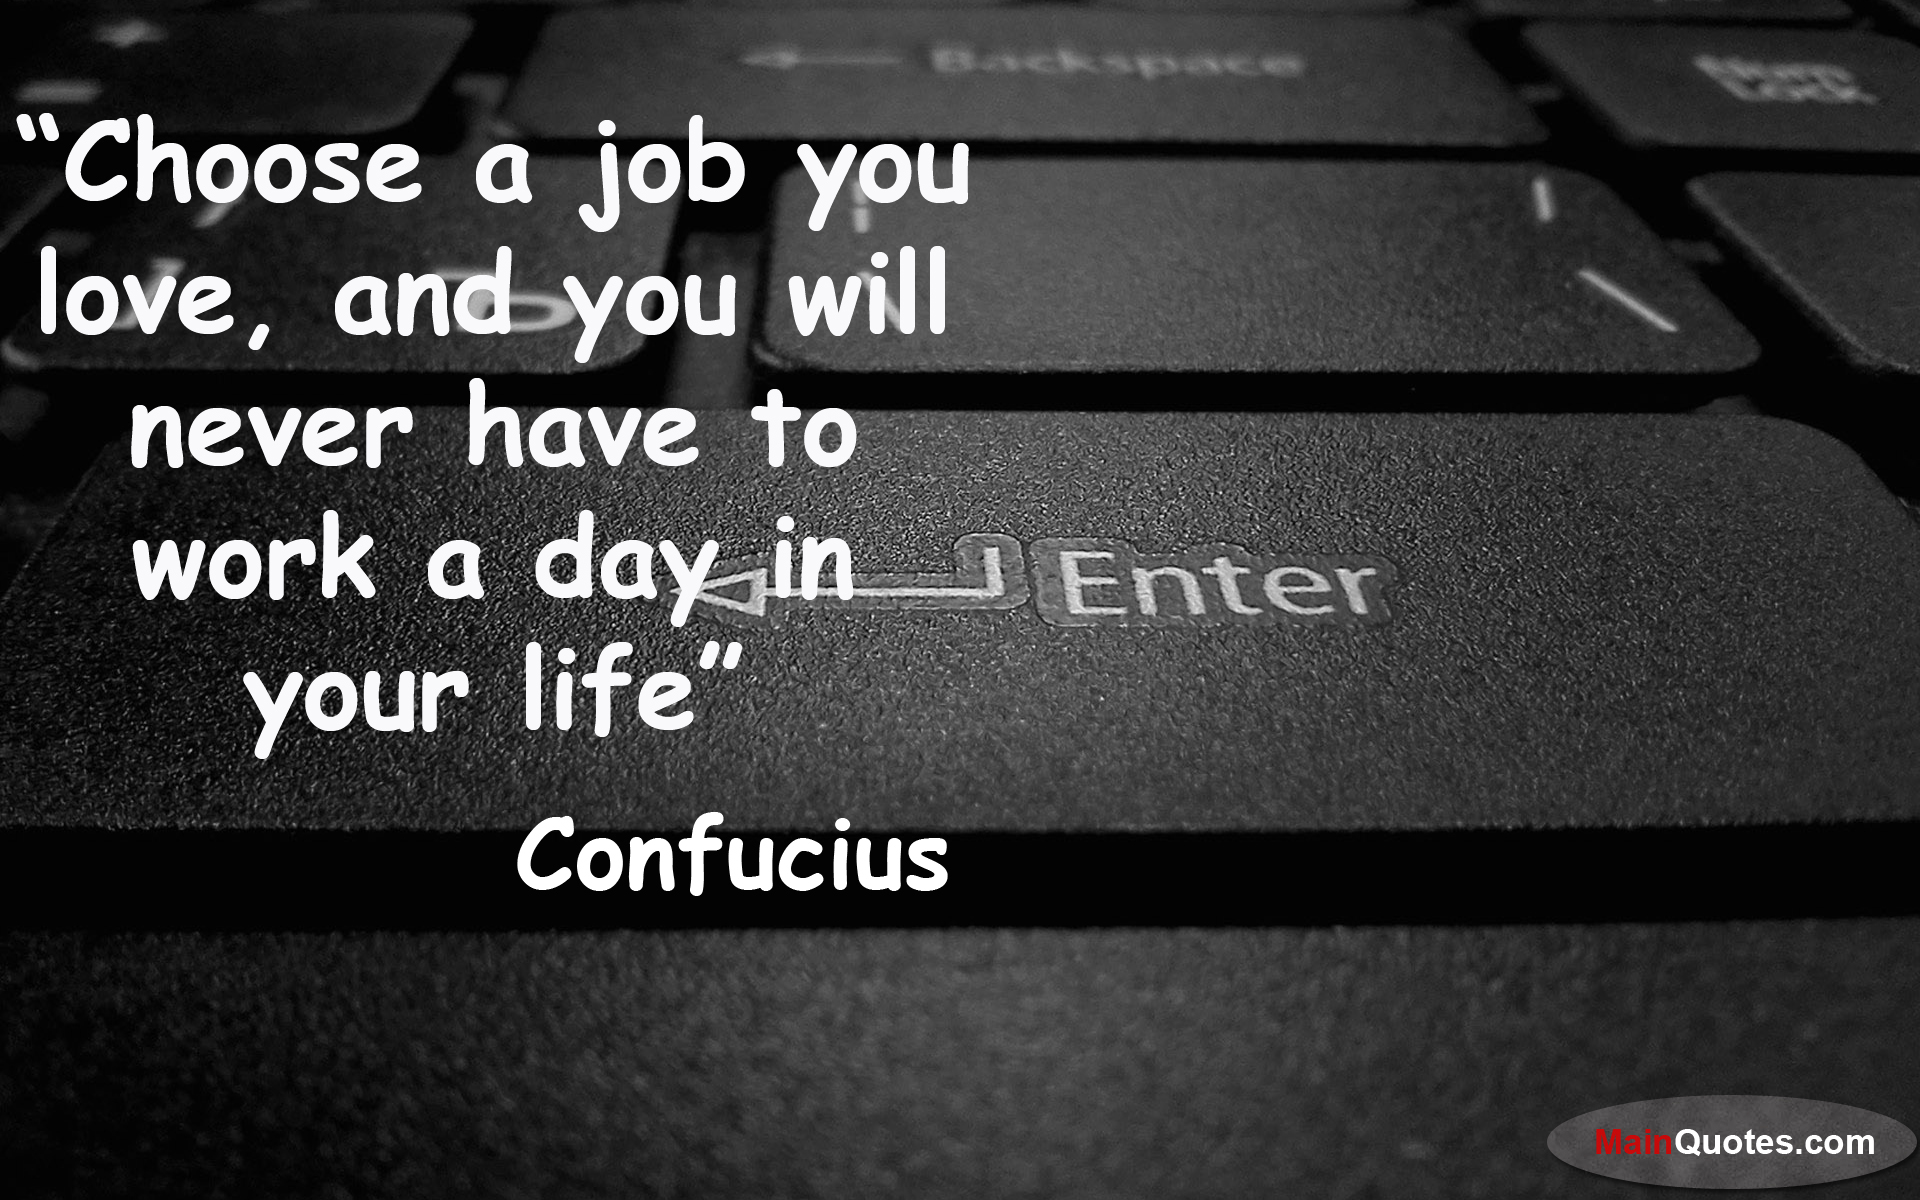 Loved you have to find. Choose a job you Love, and you will never have to work a Day in your Life. You jobs. Confucius choose a job. Choose the job you like and you will never work a Day.